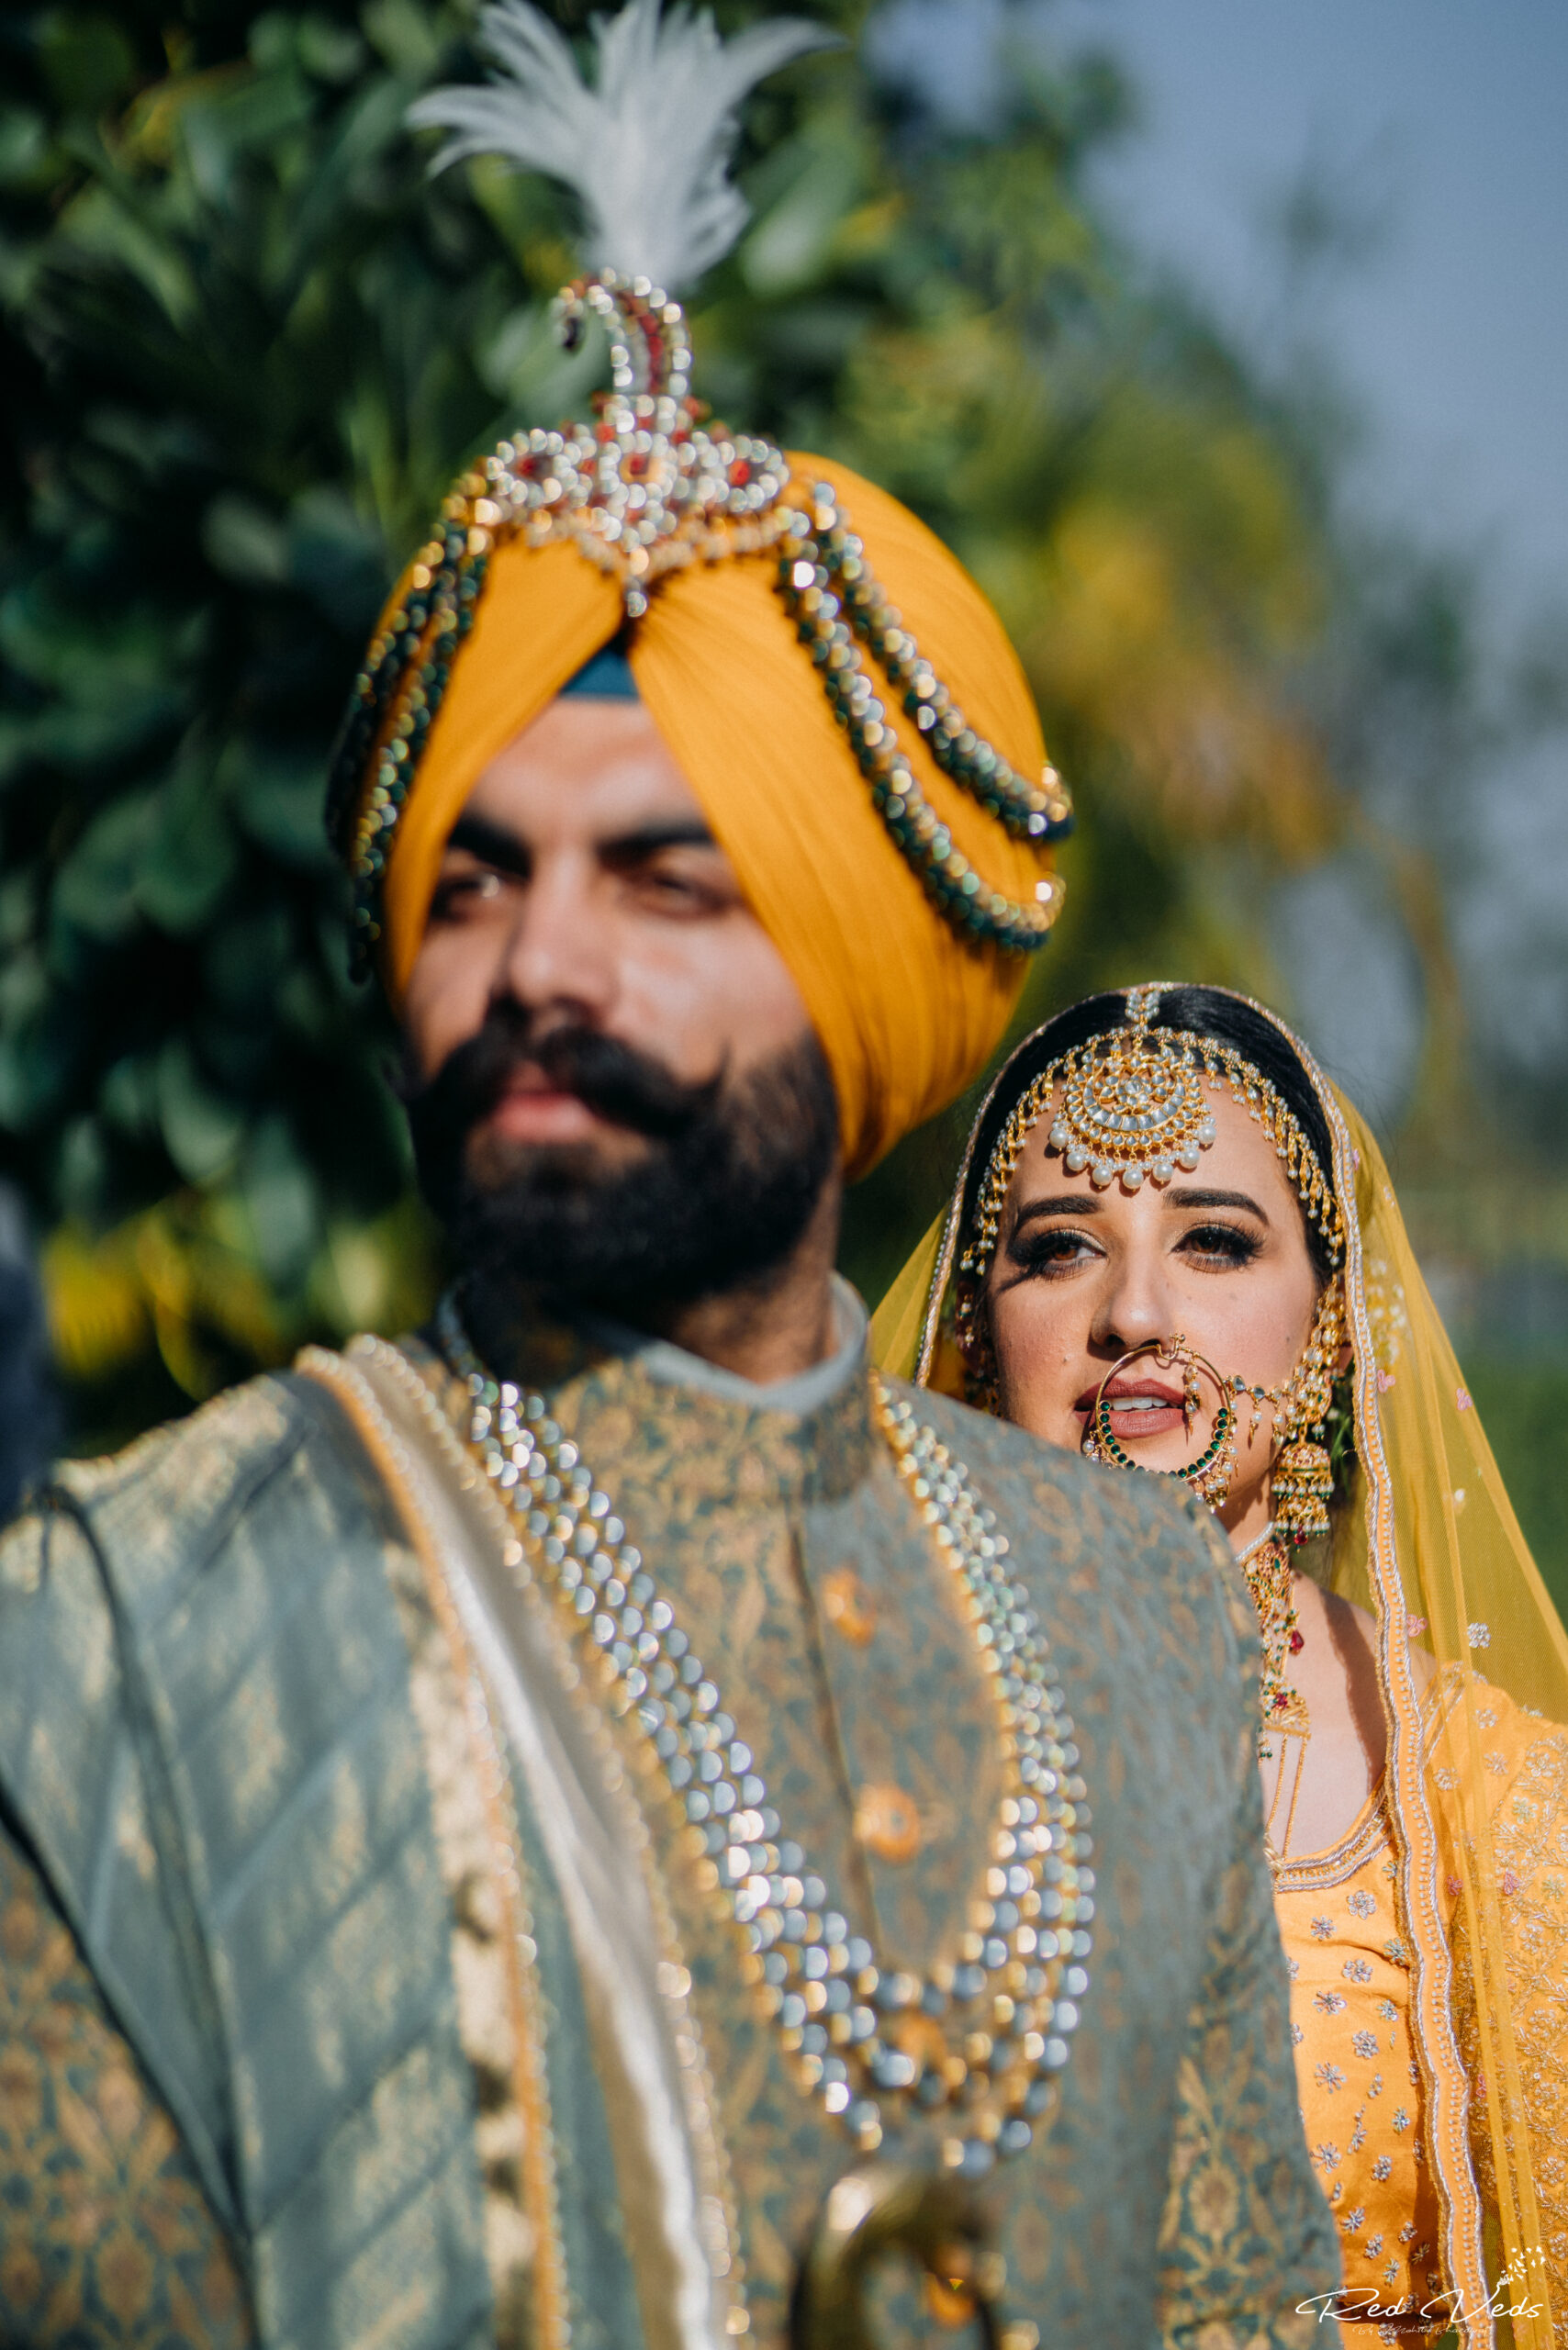 Indian Wedding Group Photo Poses And Ideas For Your Dream Wedding